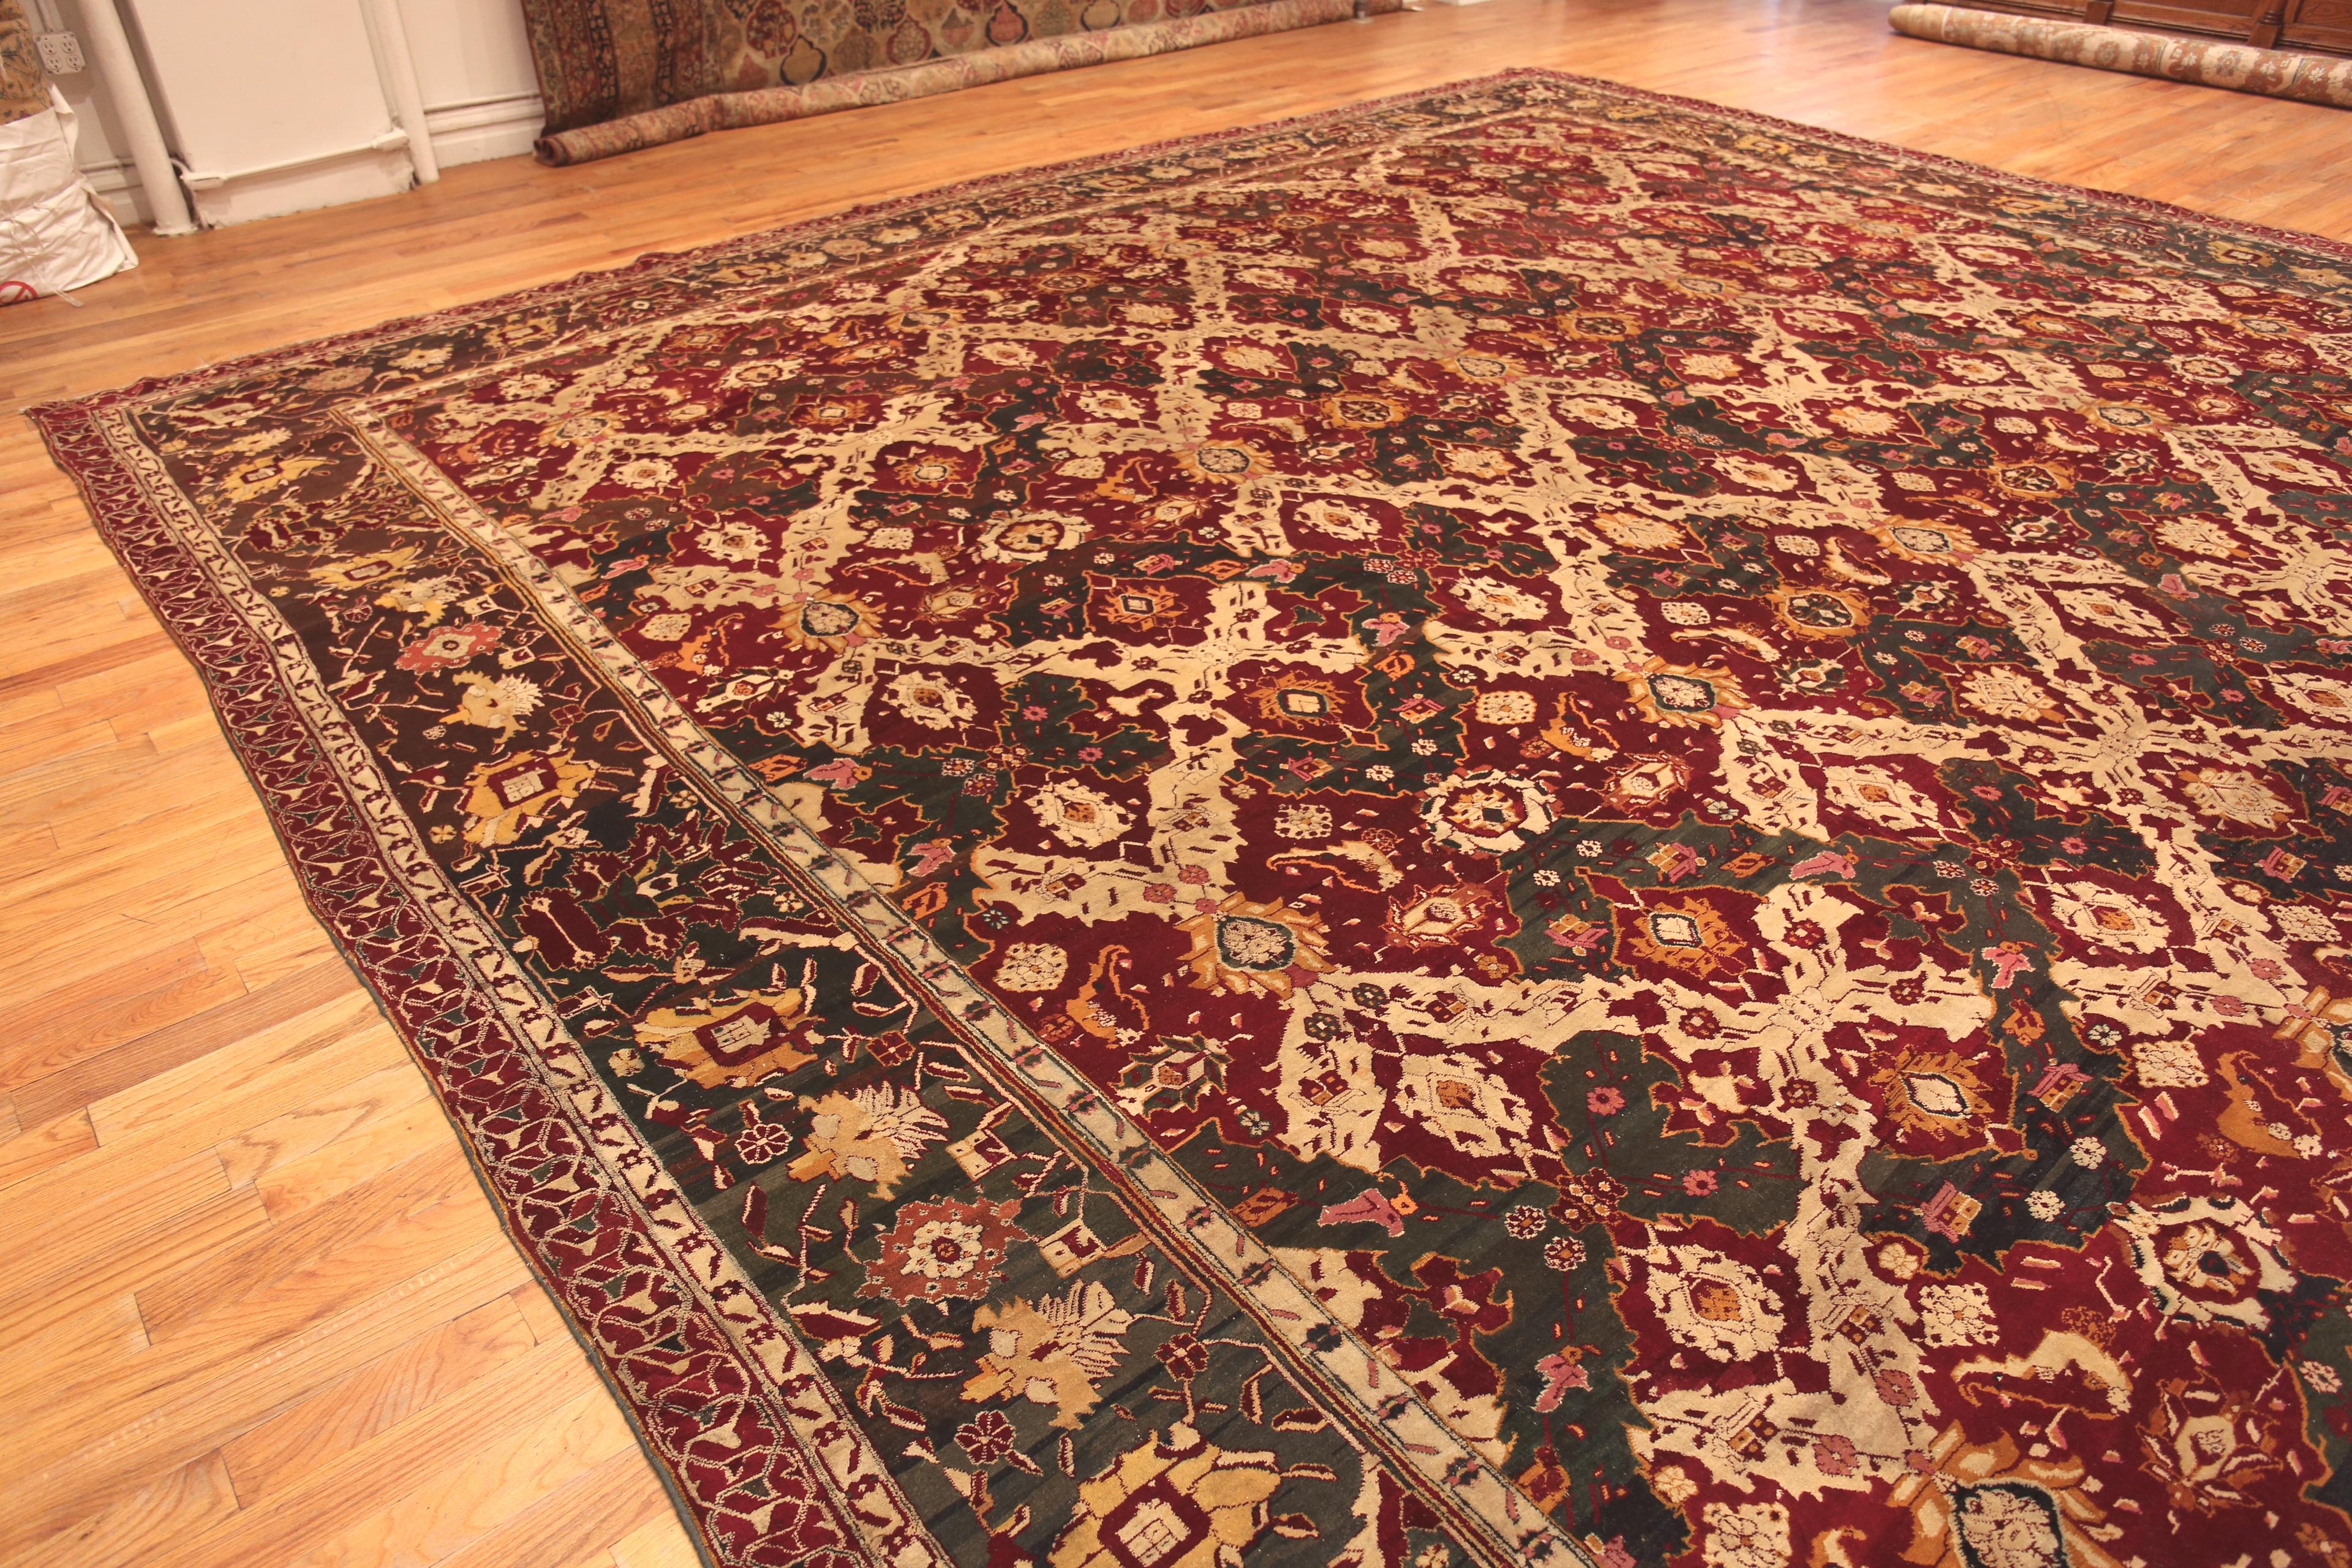 Oversized Antique Indian Agra Rug, Country of Origin: India. Circa date: 1880. Size: 18 ft 2 in x 30 ft 10 in (5.54 m x 9.4 m)